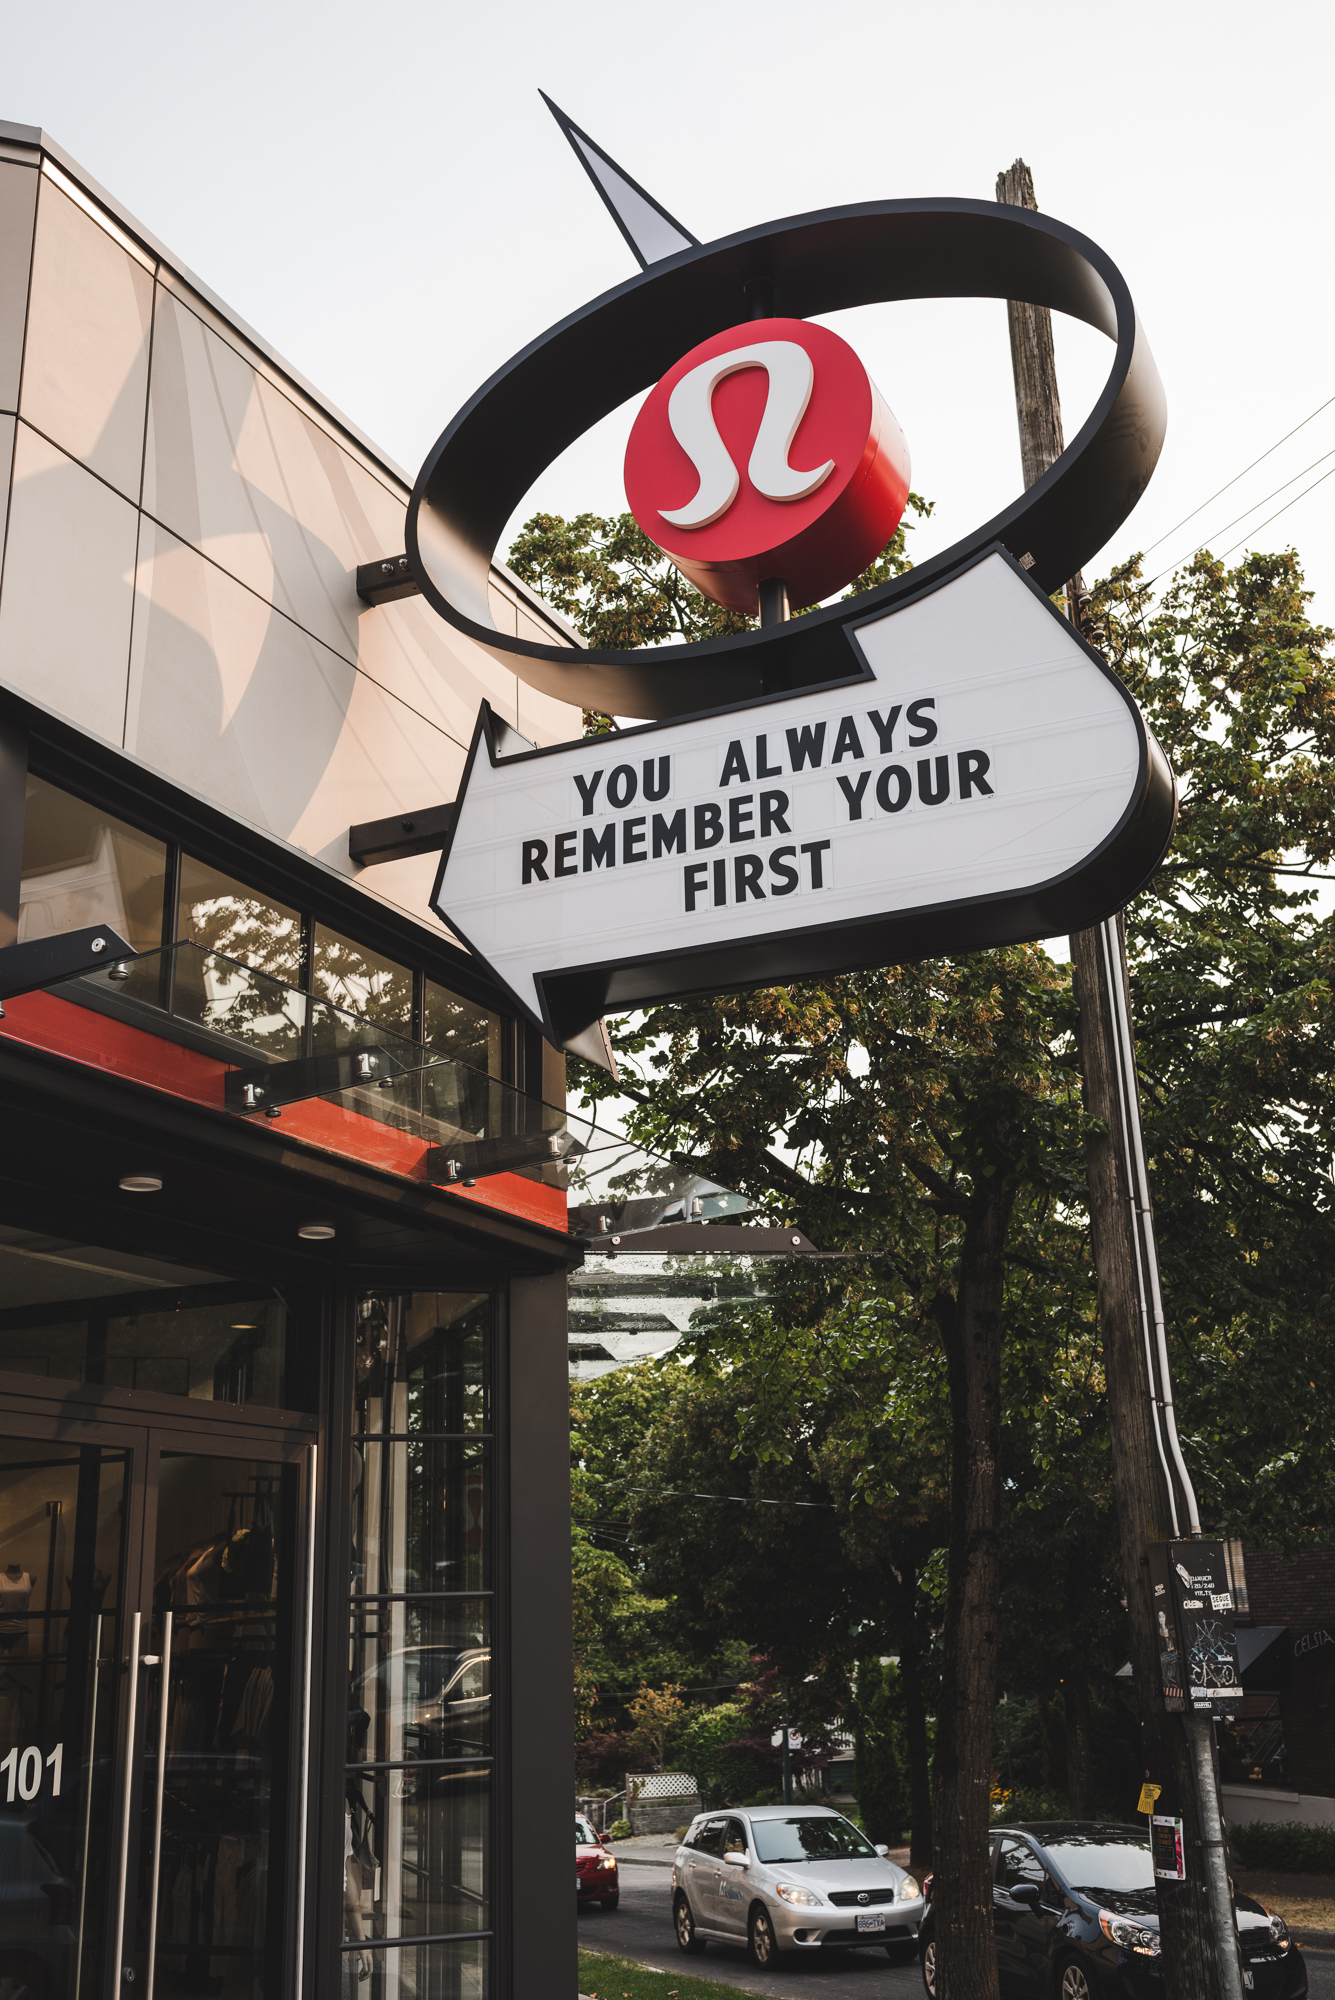 History Lululemon was founded in 1998 by Chip Wilson in Vancouver